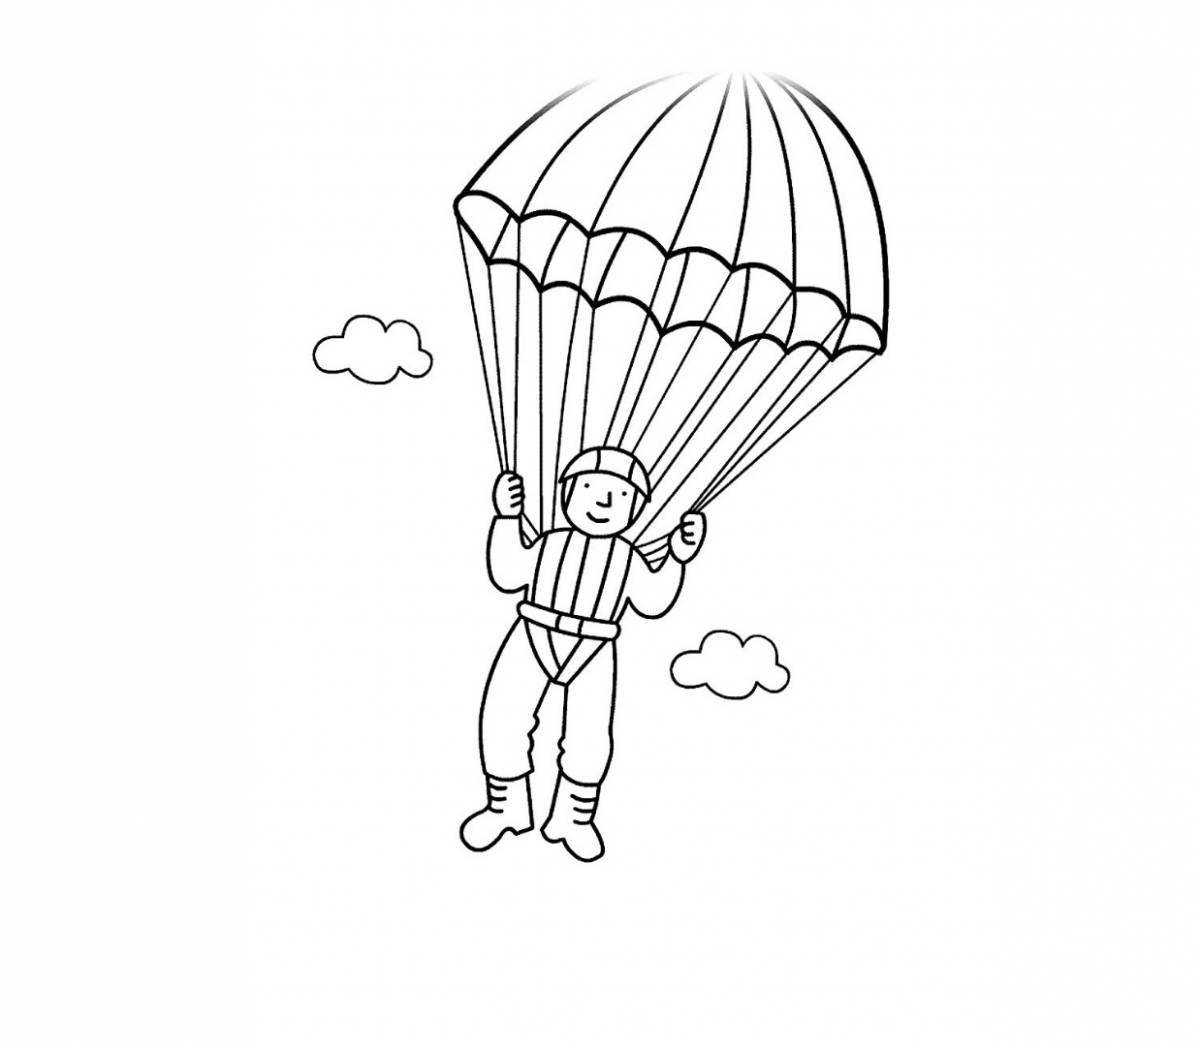 Colorful parachute coloring page for kids